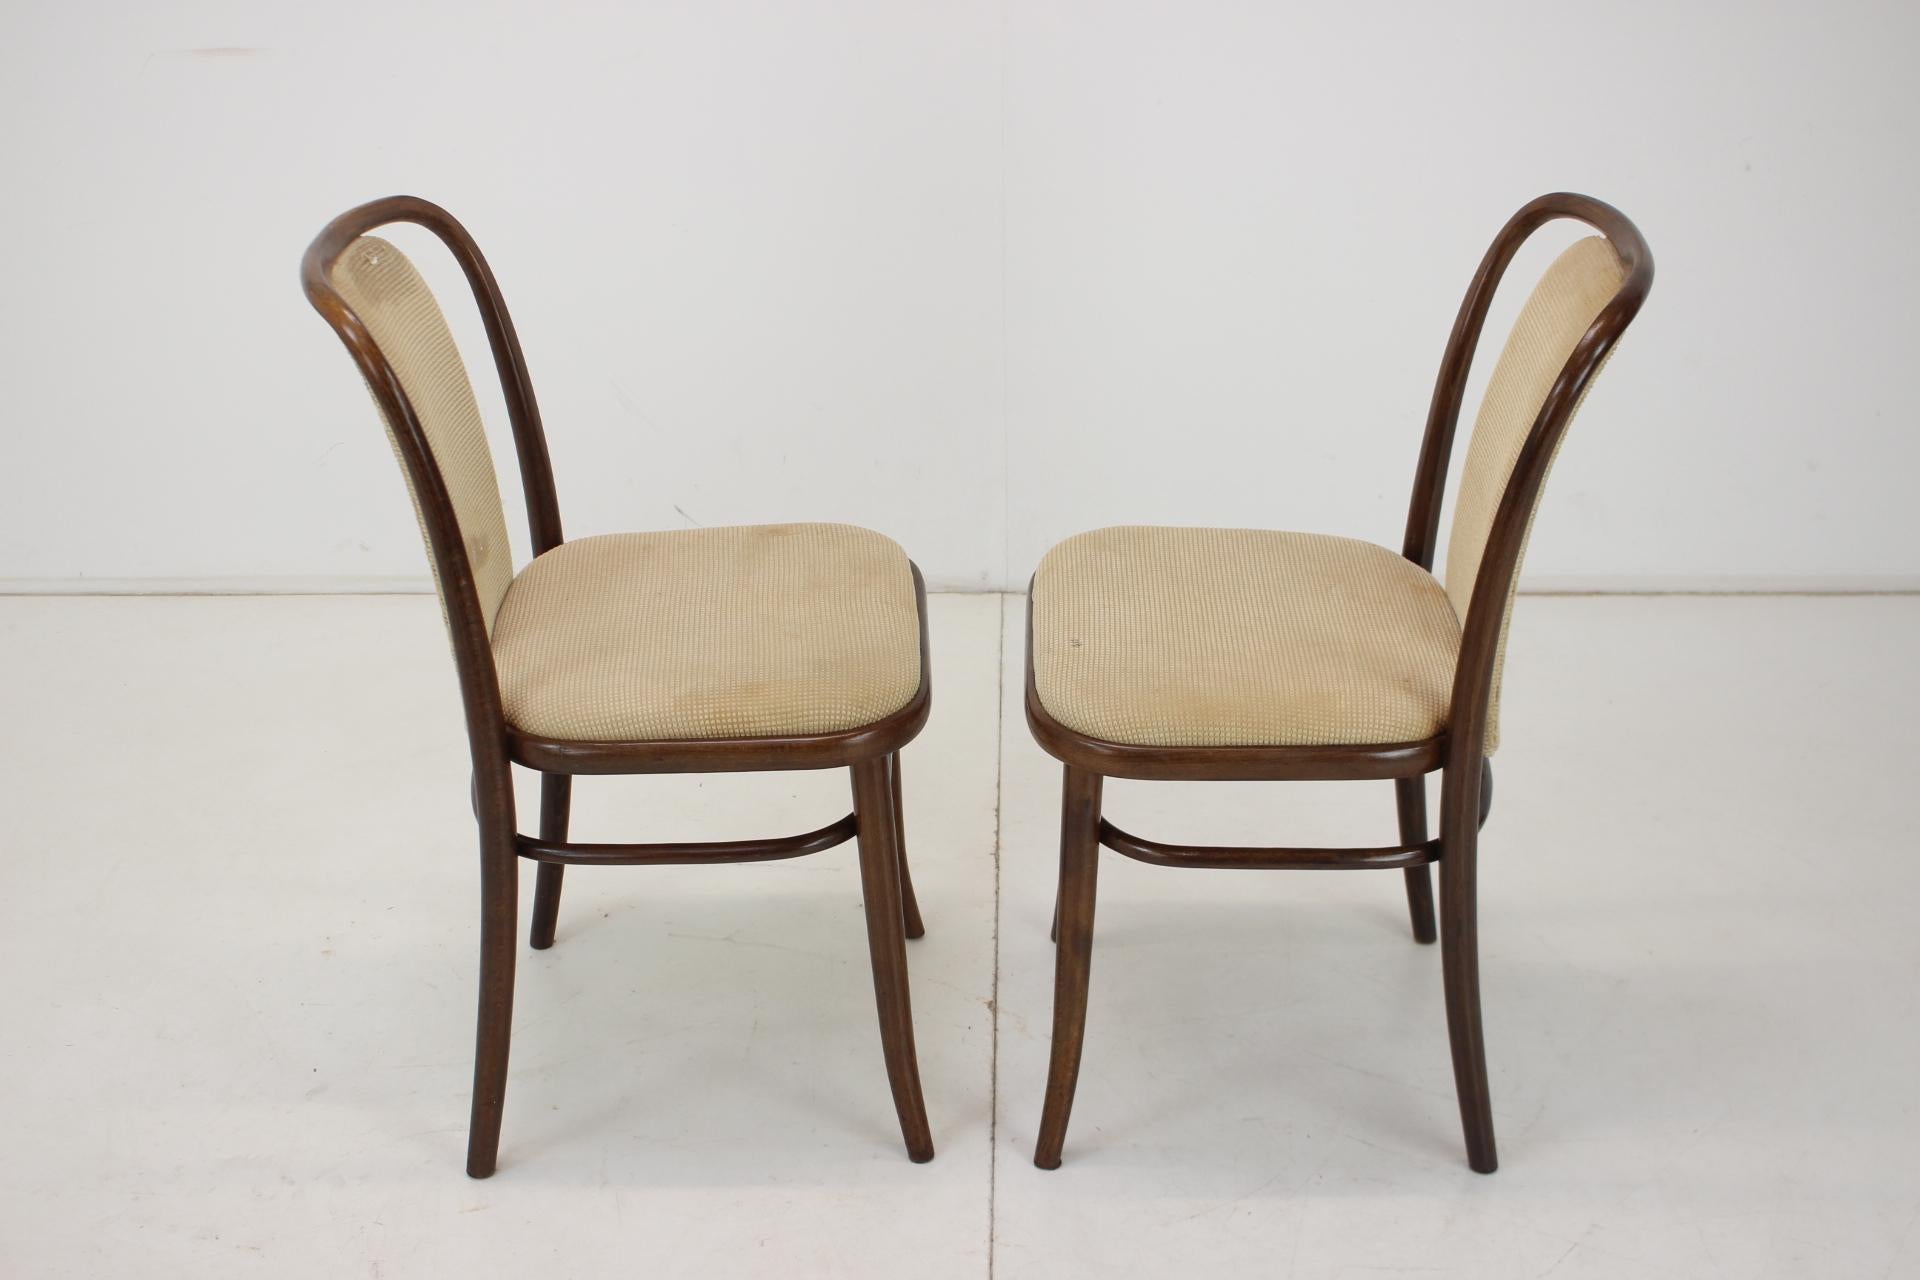 Set of Two Bentwood Chairs, Ton, 1980s For Sale 2